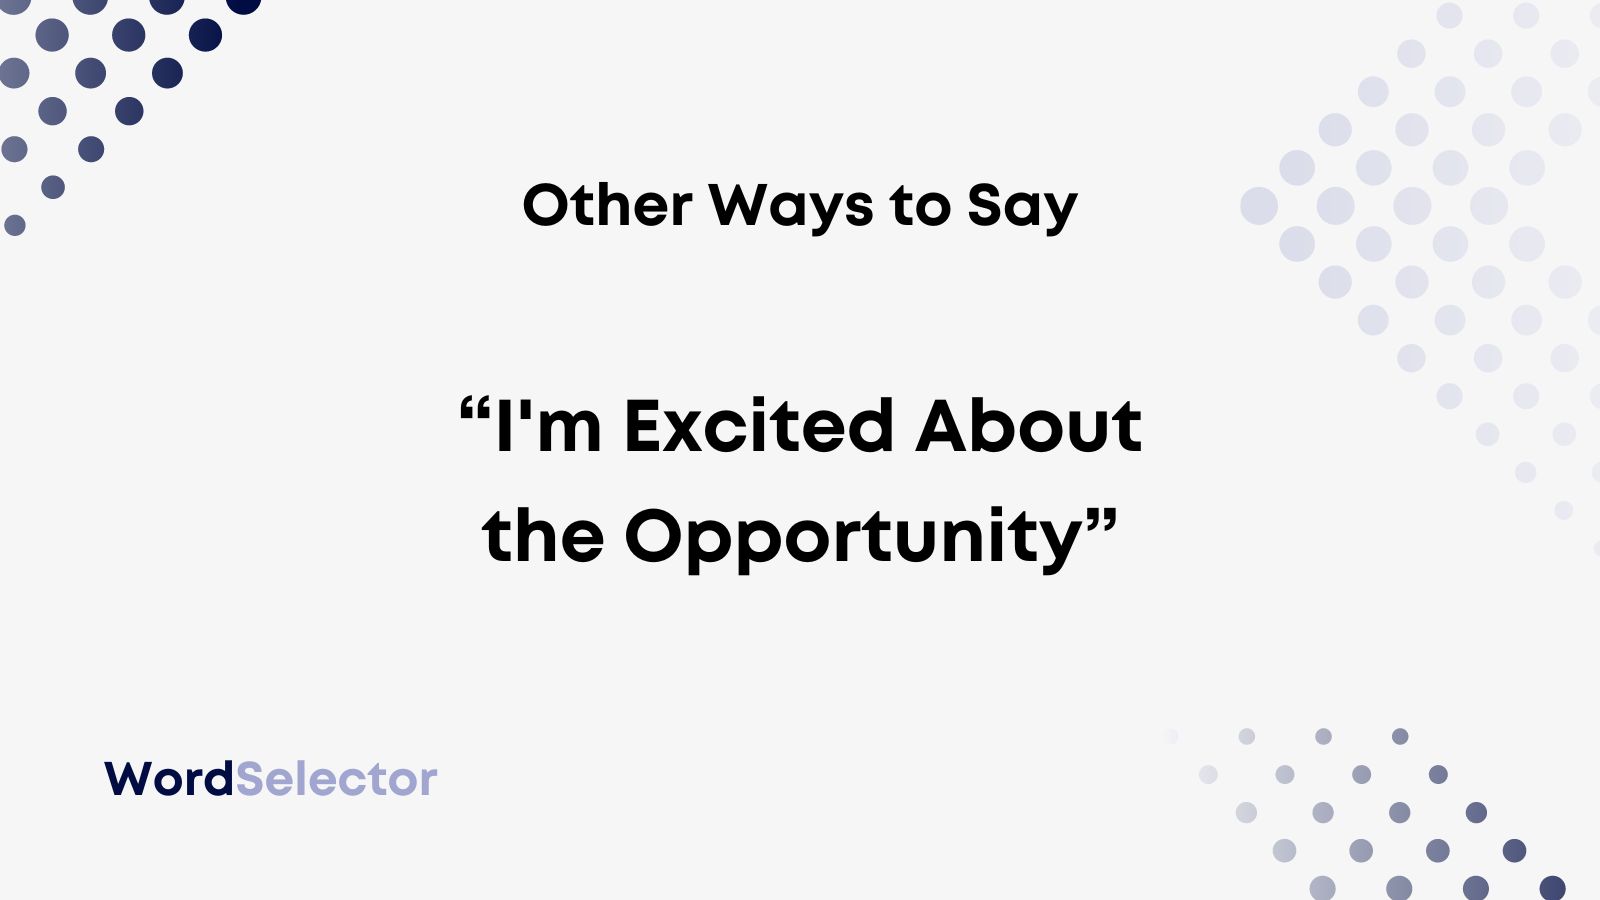 11 Other Ways to Say “I'm Excited About the Opportunity” - WordSelector